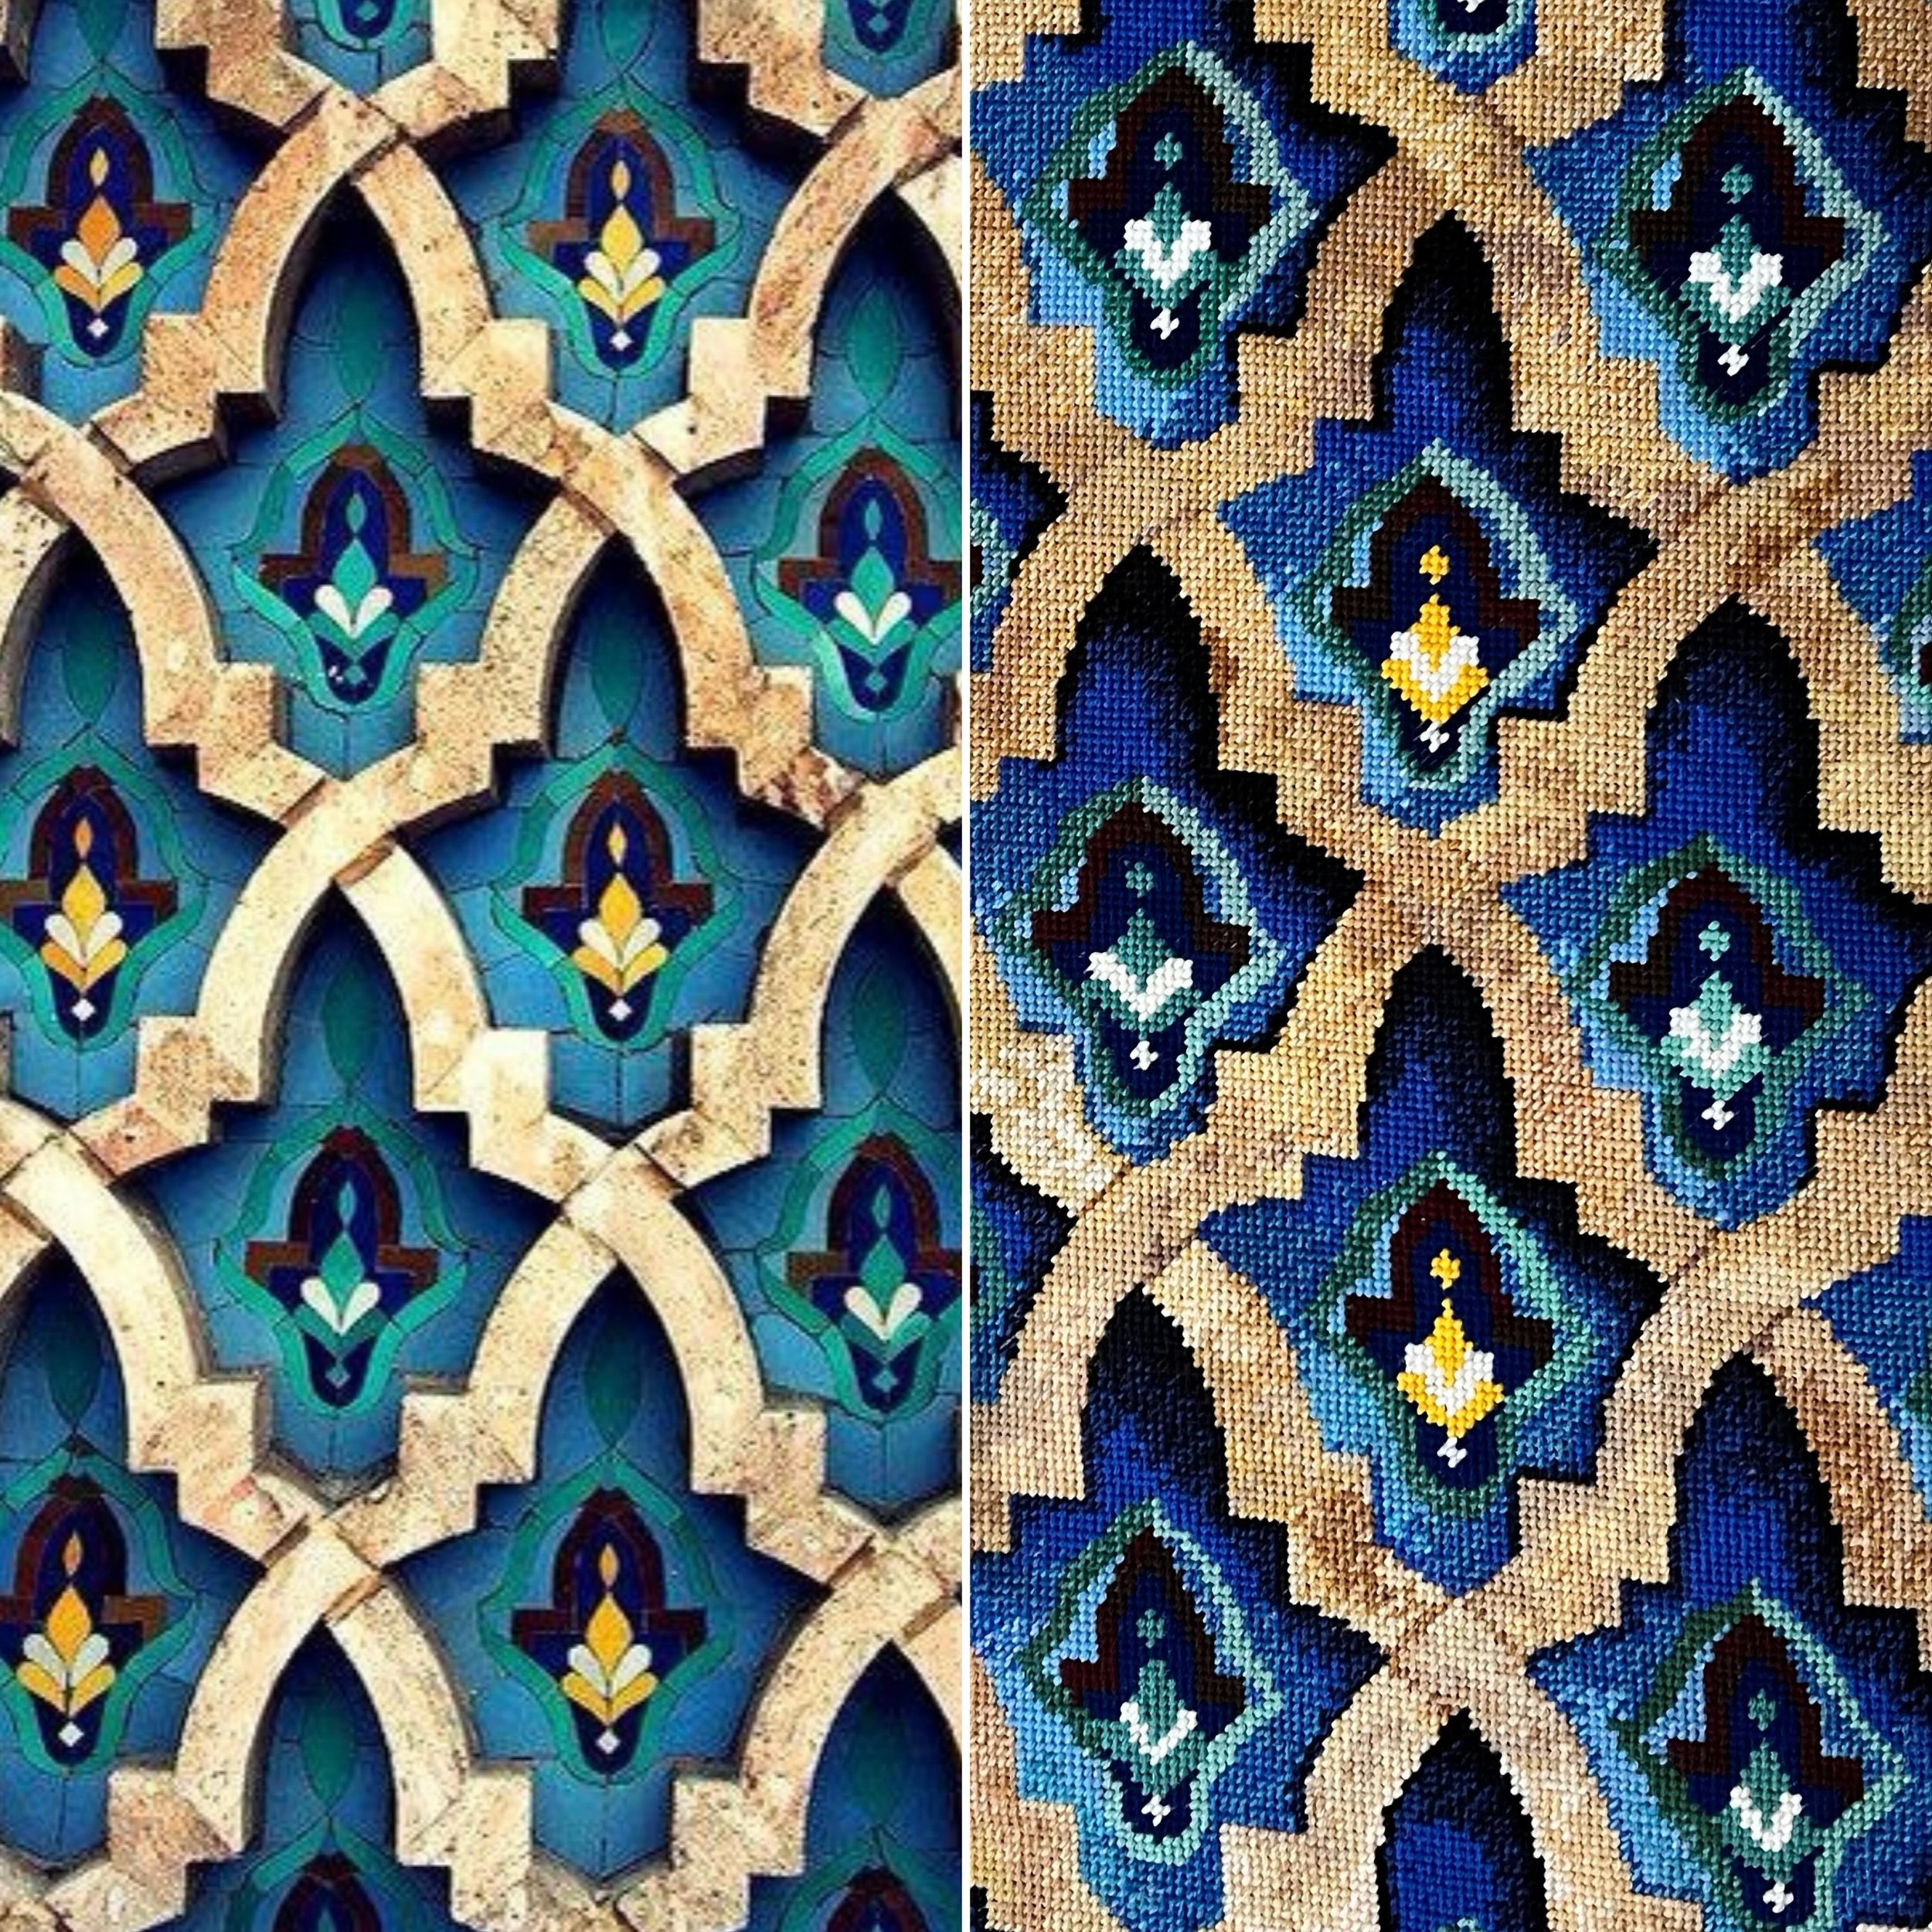 Left: ceramic tiles. Right: needlepoint. 

Latest completed needlepoint inspired by &lsquo;zellige&rsquo; Moroccan tiles found at Hassan II Mosque, Casablanca.  Stitched with pure wool from the Estate range at @morrisandsons Sydney, on 5 count canvas